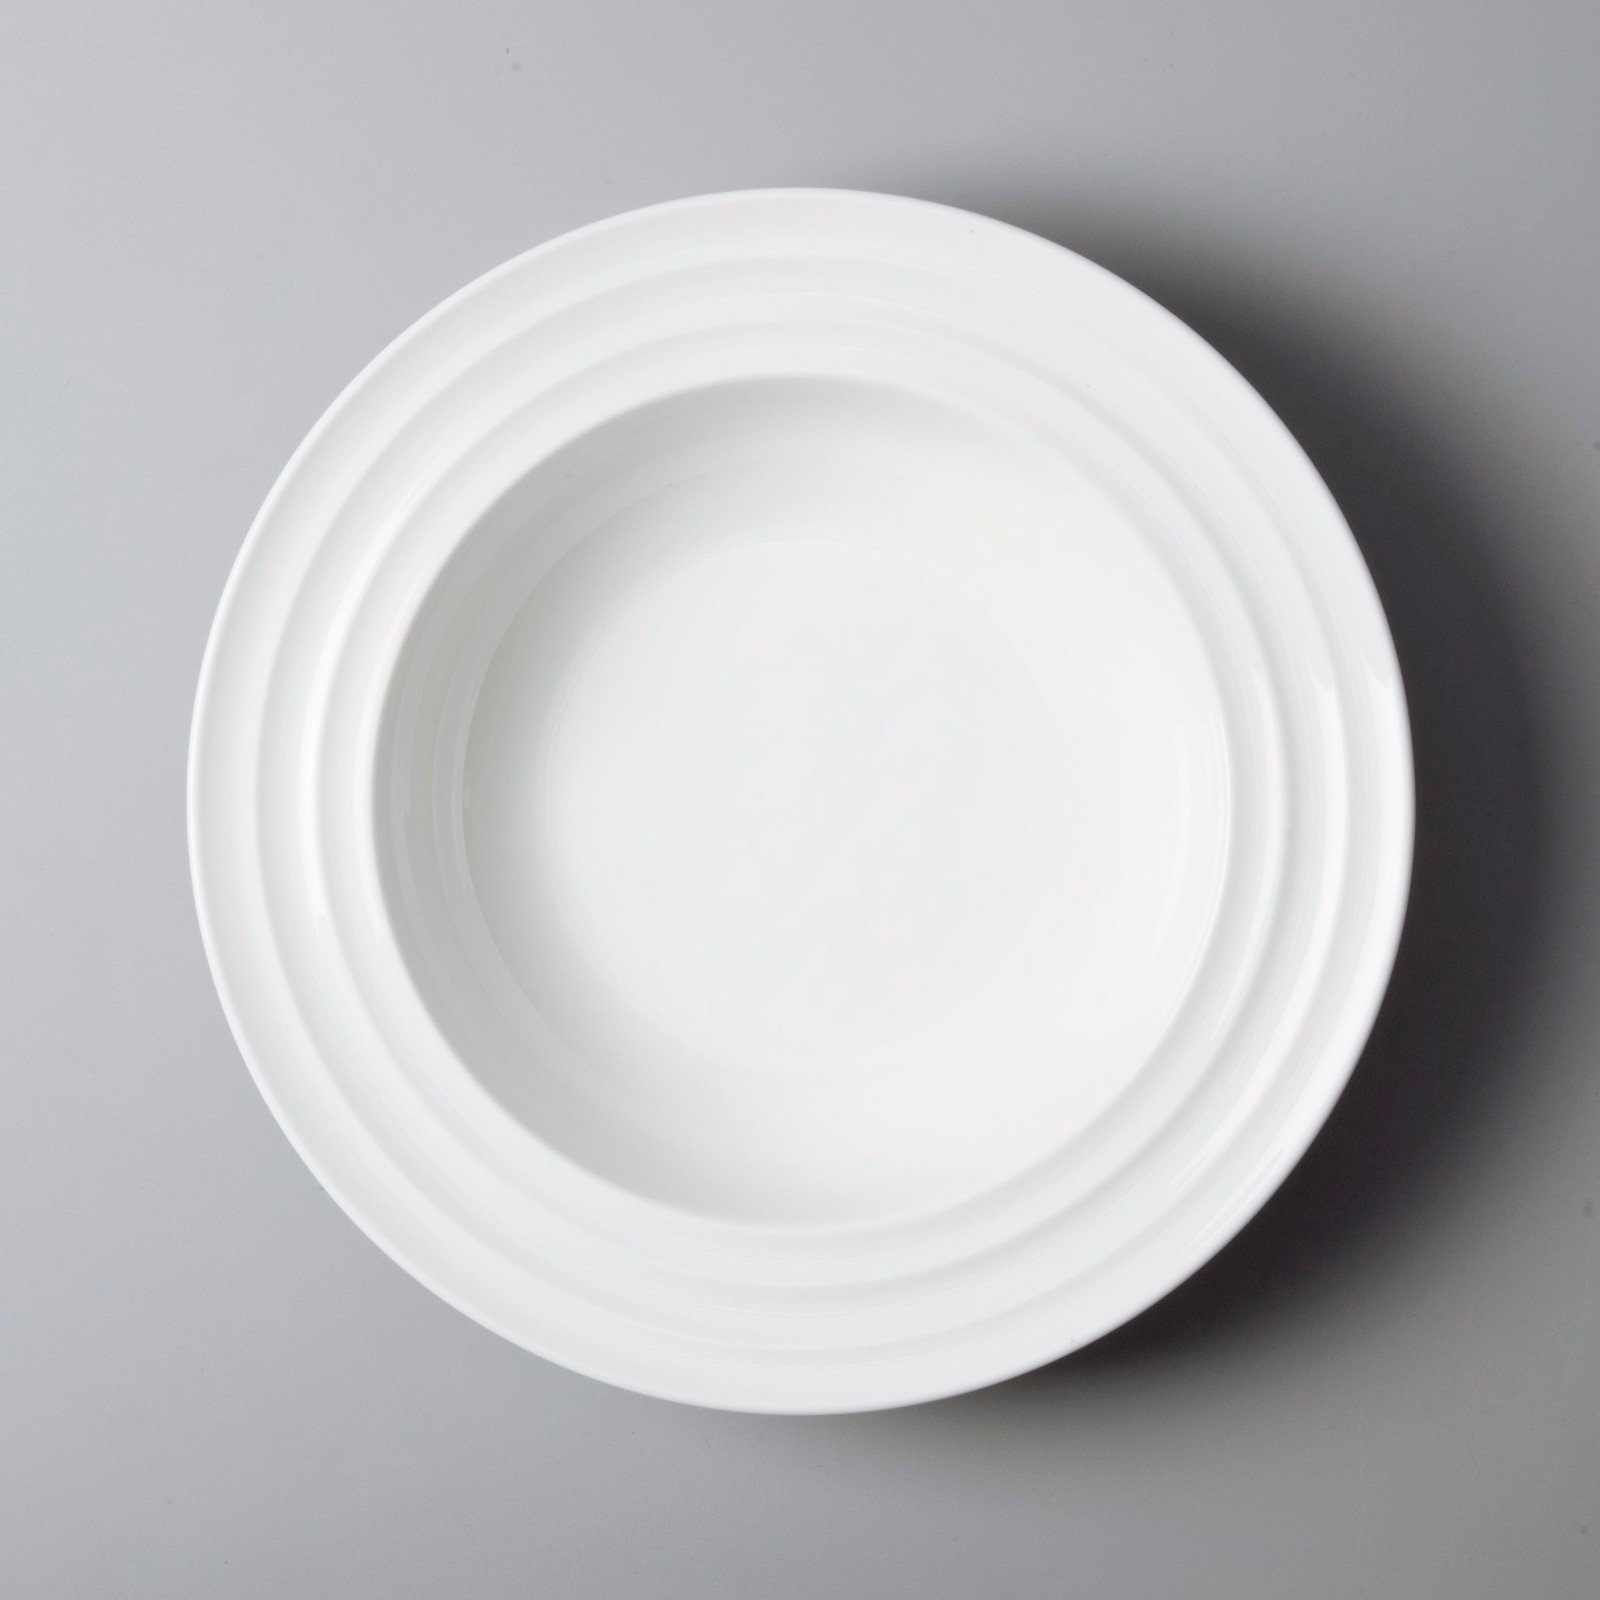 white porcelain square plates french style for kitchen Two Eight-4